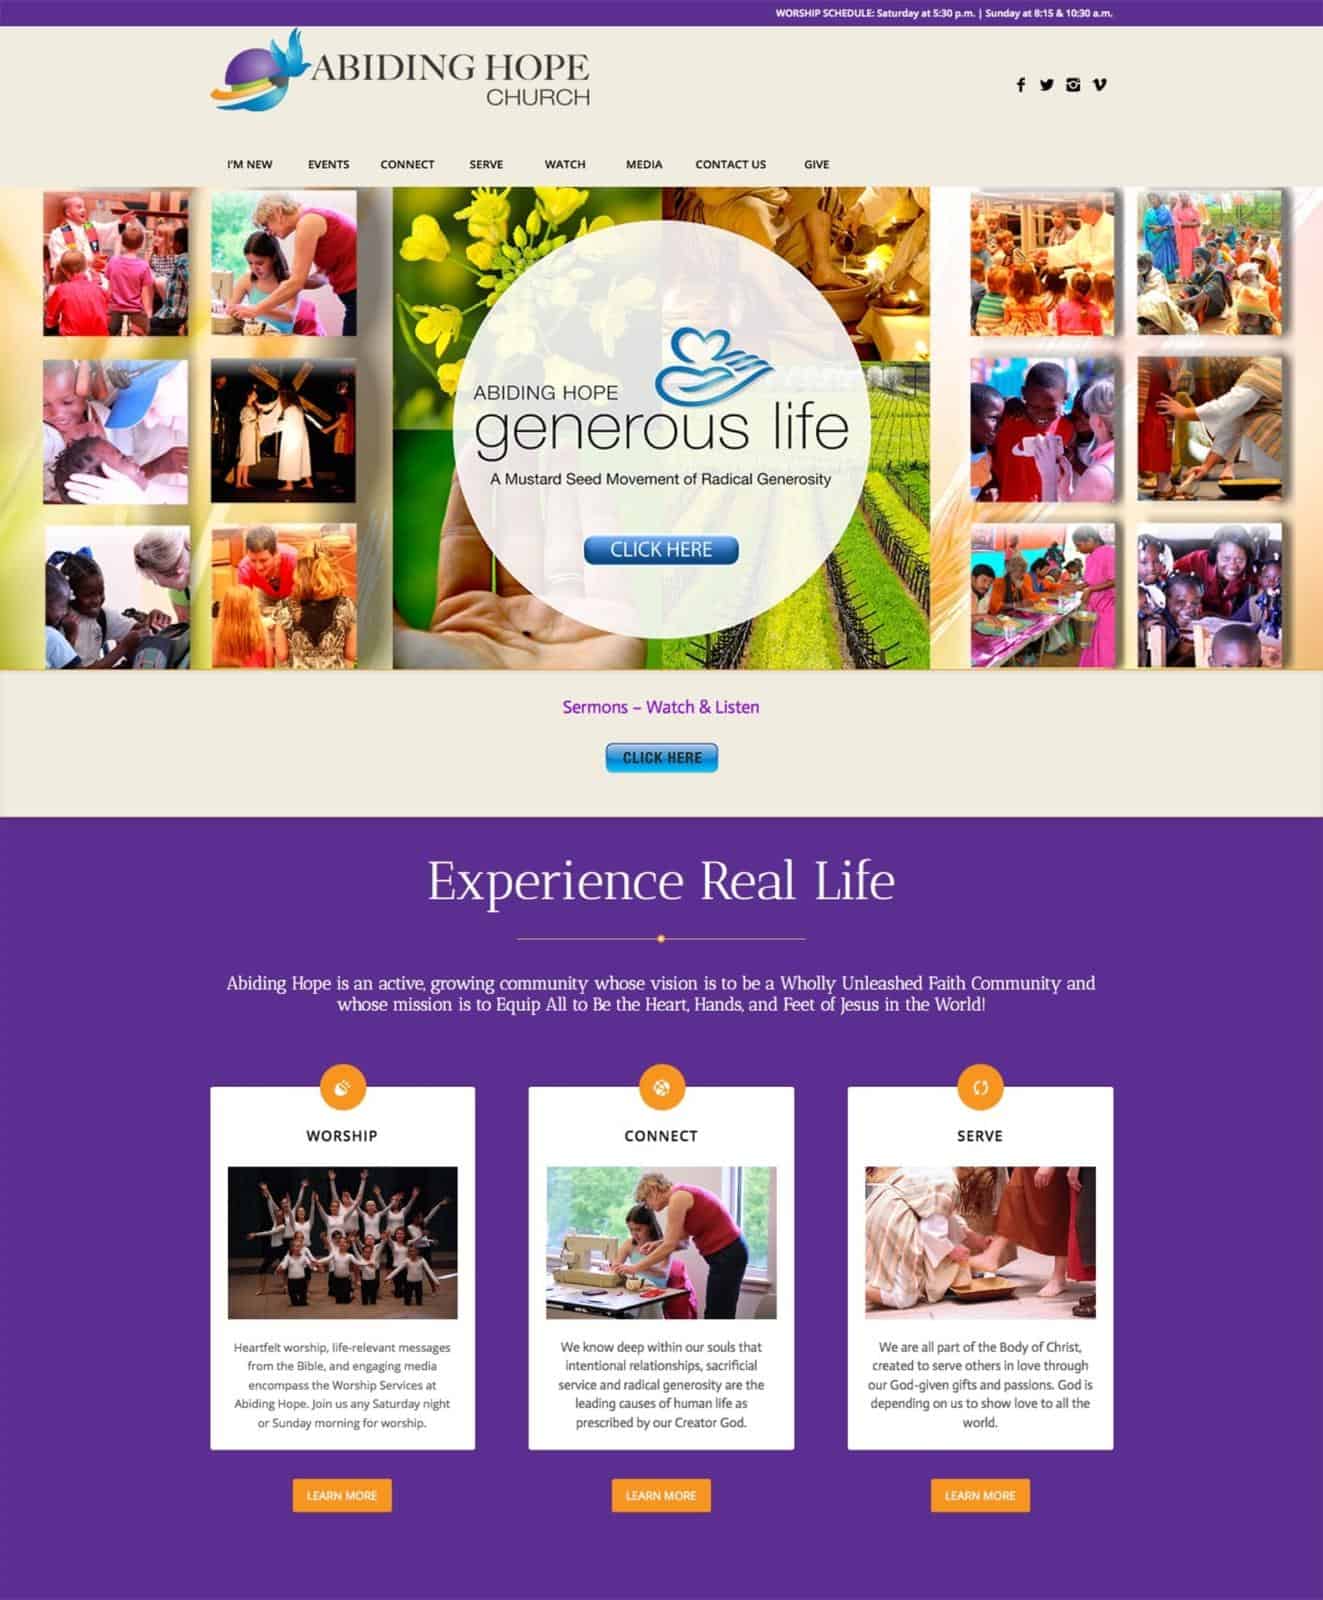 WOW Factor Digital Marketing Agency - Generous Life Campaign